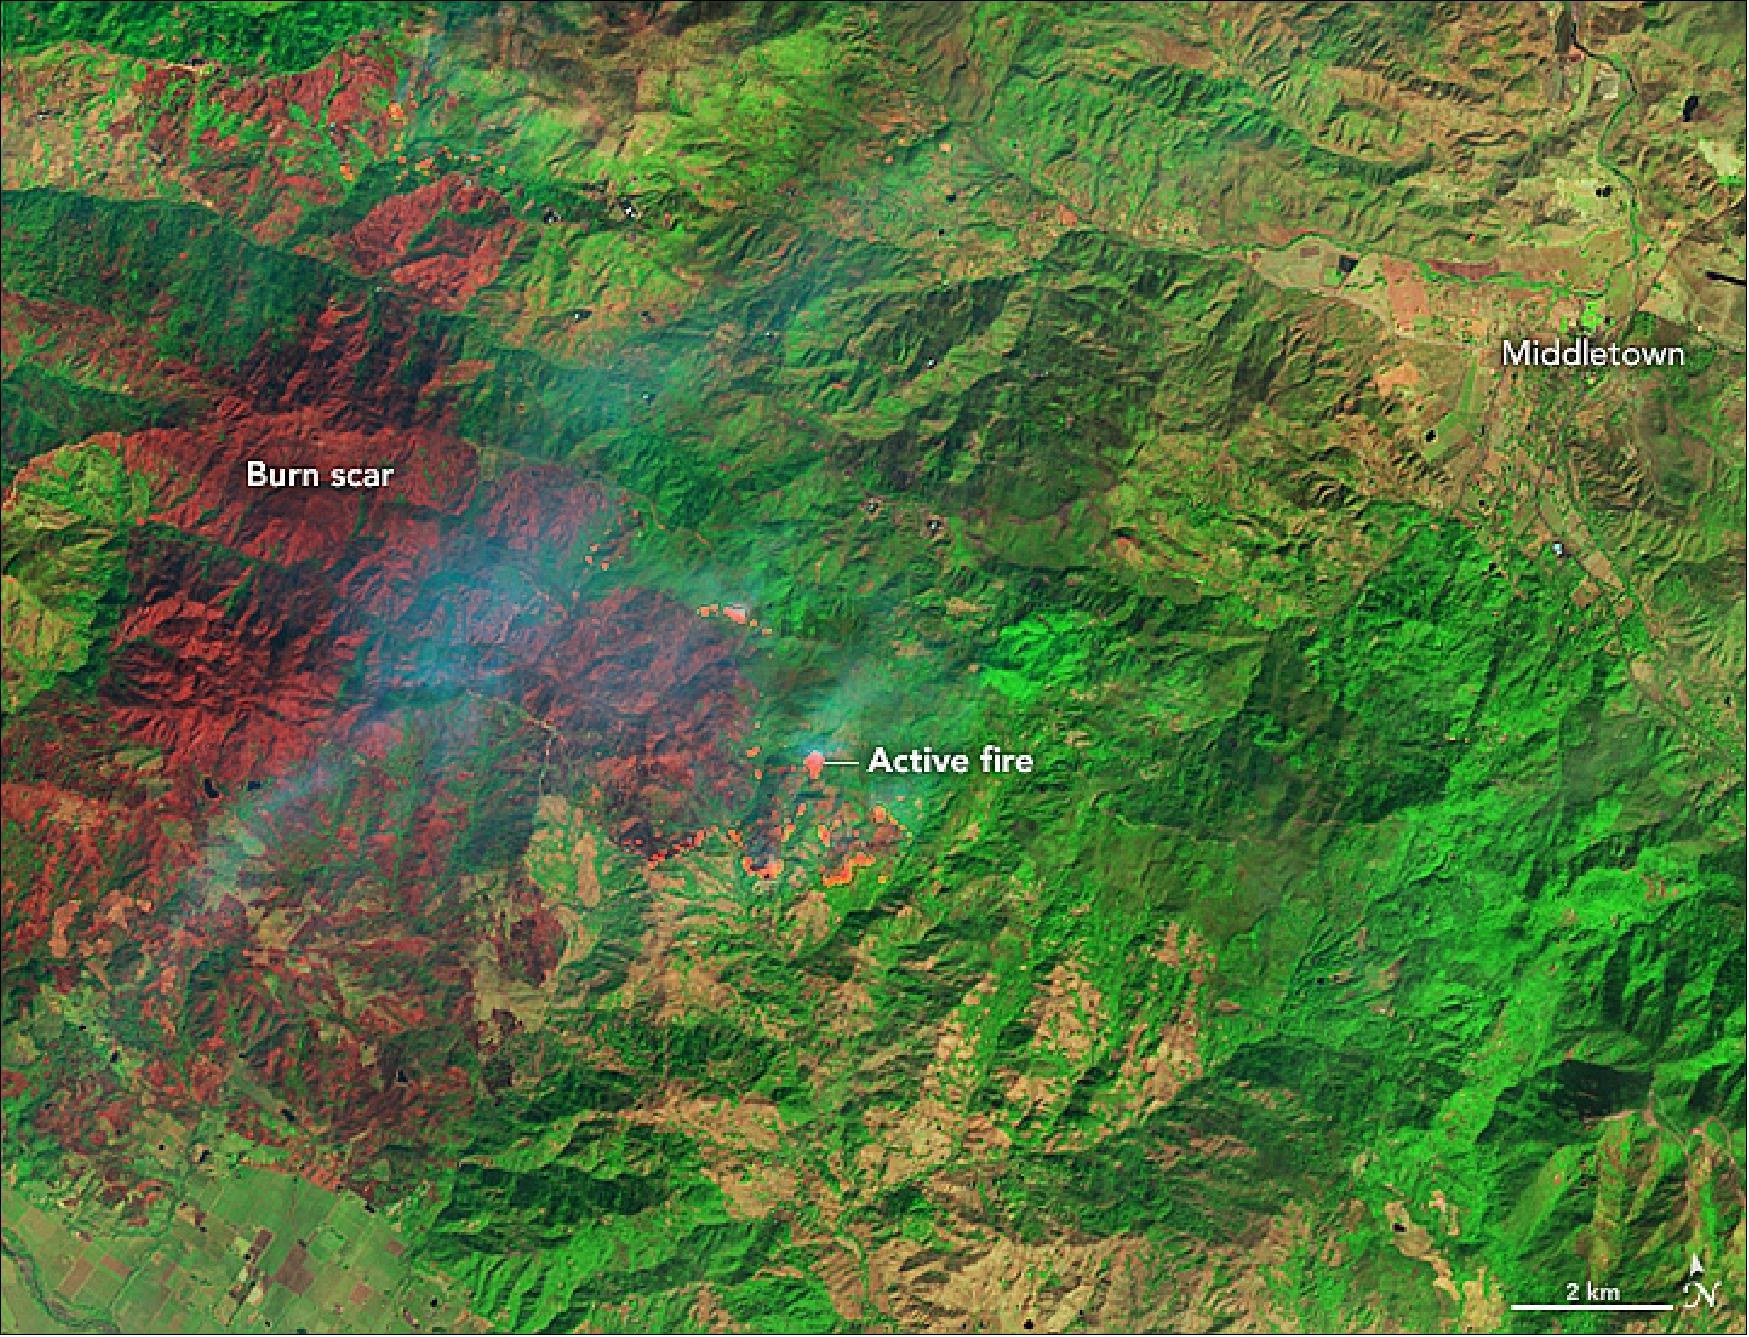 Figure 24: This image shows a false-color view of the burn scar from the Kincade Fire as it appeared on October 26, 2019. The image combines shortwave-infrared, near-infrared, and green light from Landsat 8 (OLI bands 7-5-4) to better distinguish between burned vegetation (brown) and unburned vegetation (green). The brightest reds are active fire fronts. - The Kincade fire fits with a trend of larger, more destructive fires in California in autumn; fires in this season are strongly influenced by winds and dry weather. In addition to the impending wind storm, dry weather is expected continue in Northern California for the remainder of the week (image credit: NASA Earth Observatory, image by Joshua Stevens and Lauren Dauphin, using Landsat data from the U.S. Geological Survey and GEOS-5 data from the Global Modeling and Assimilation Office at NASA GSFC. Story by Kasha Patel)